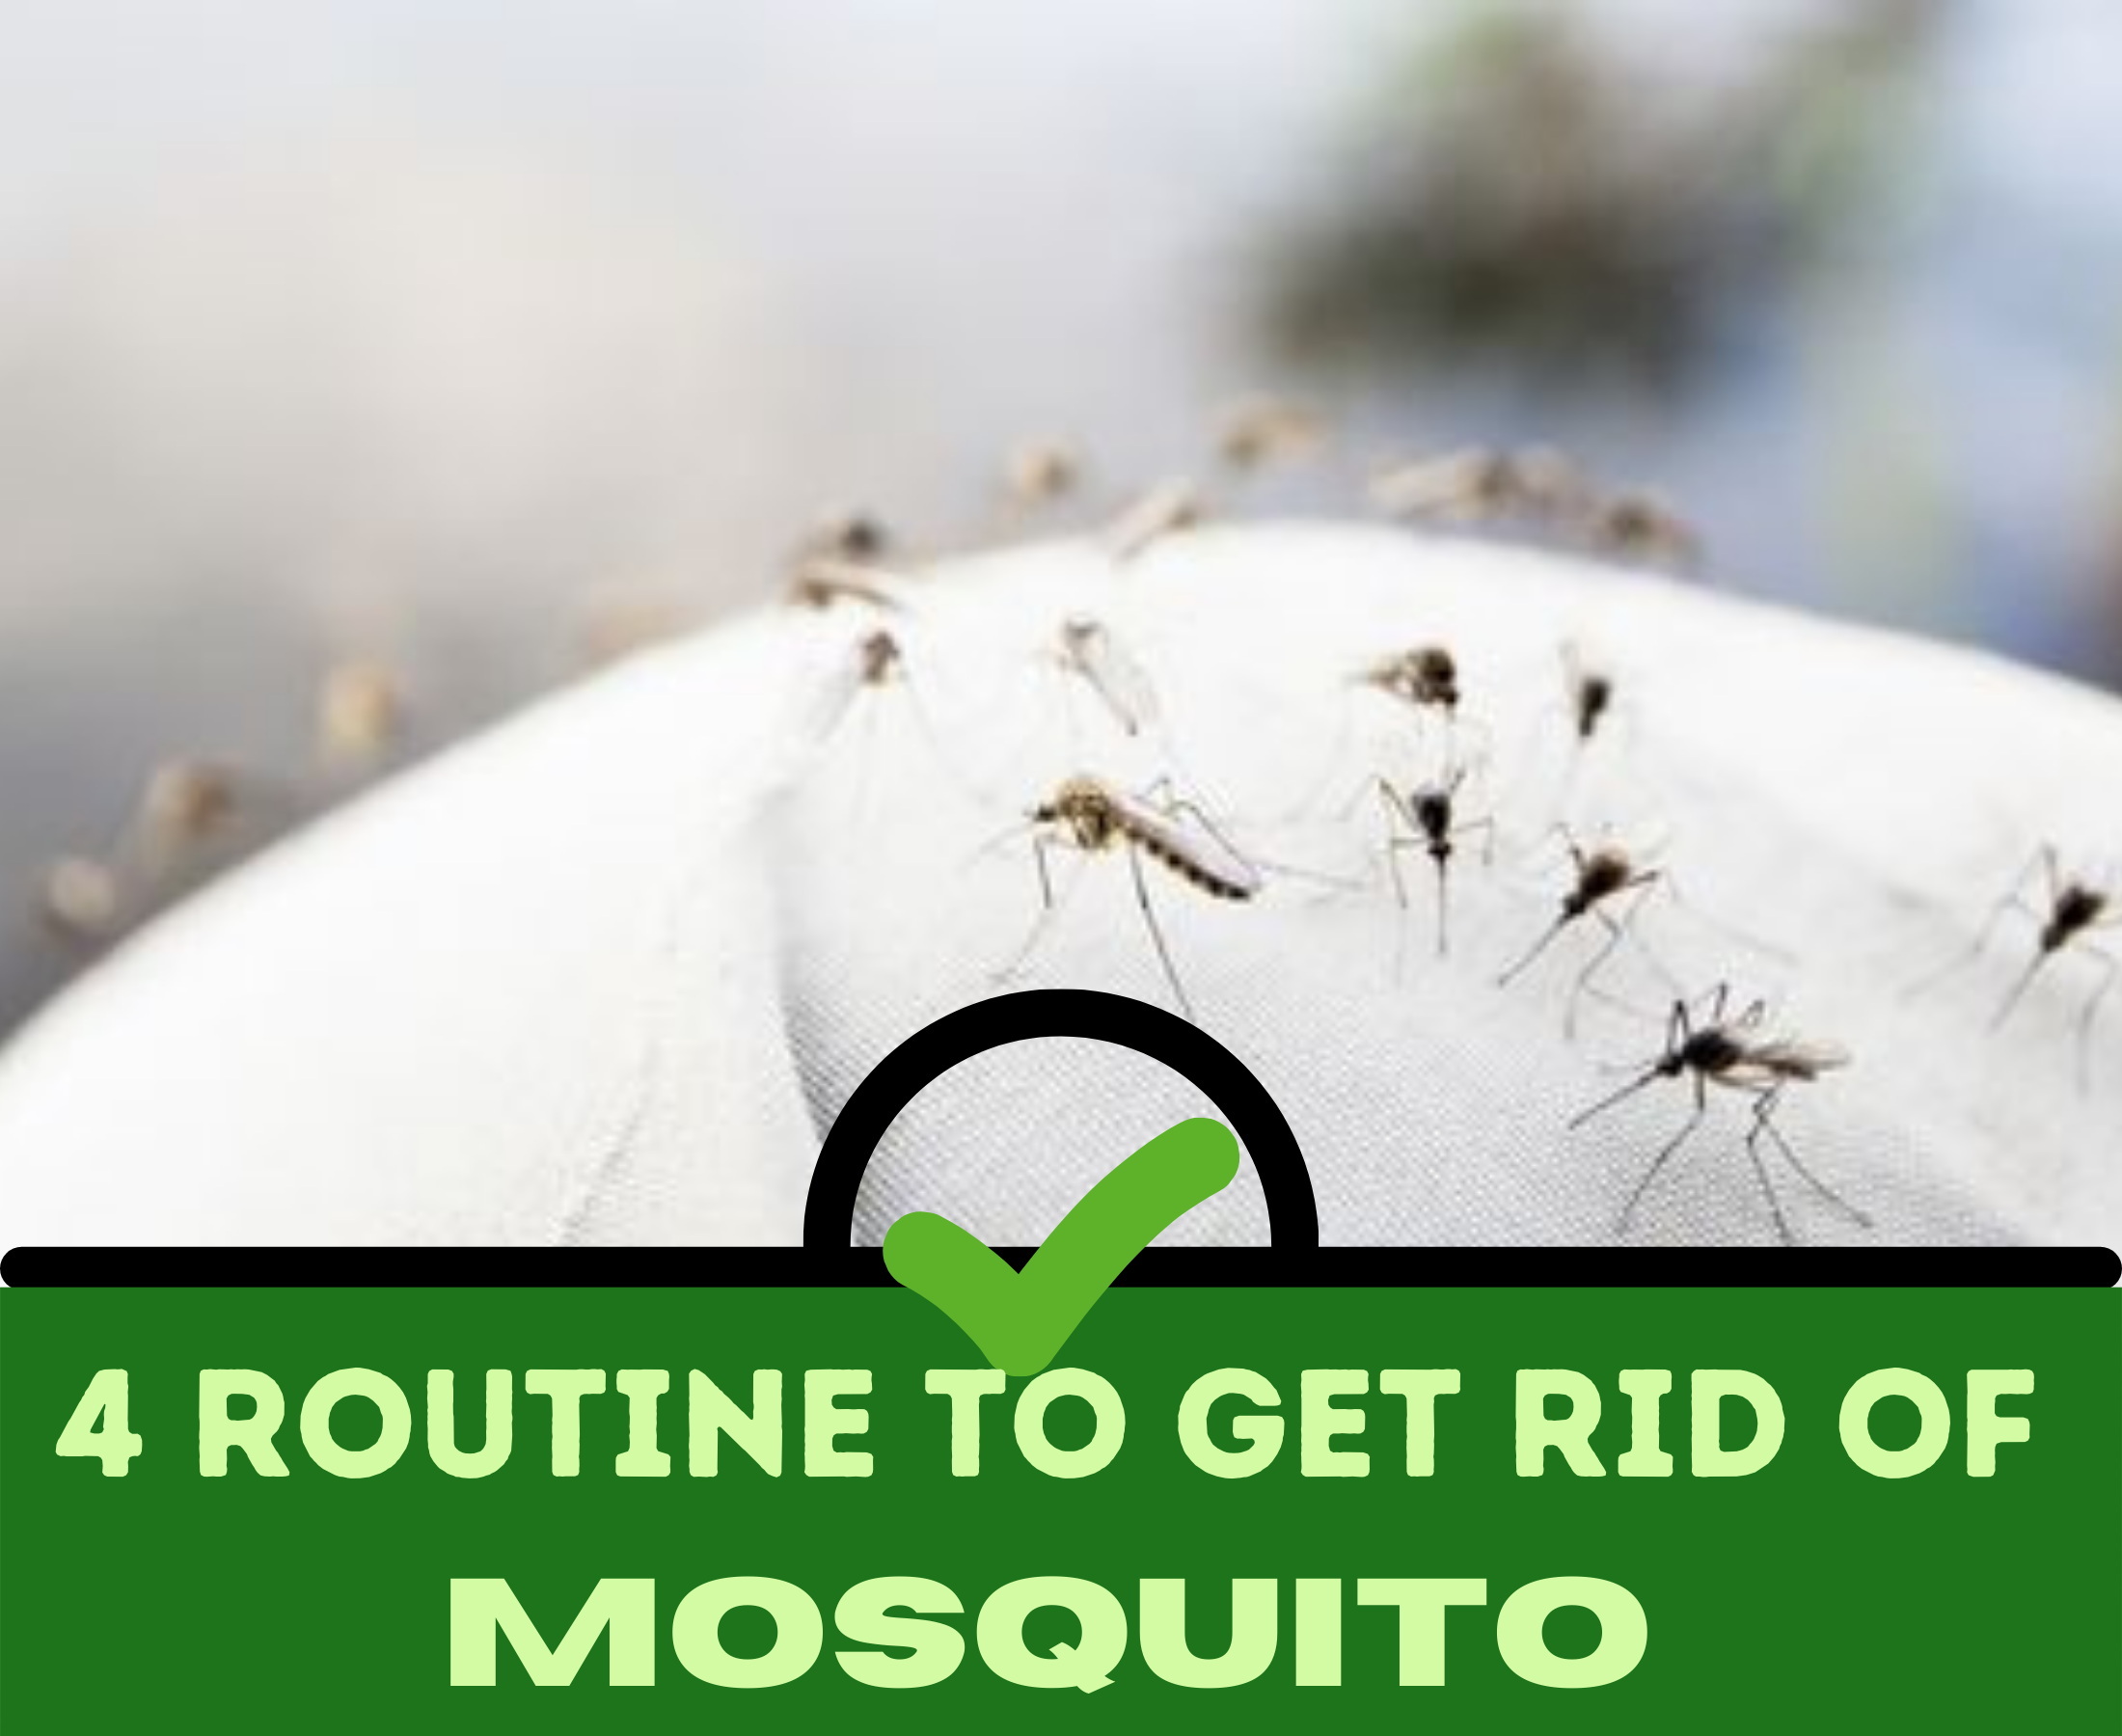 Write any four precautions/methods to prevent mosquitoes